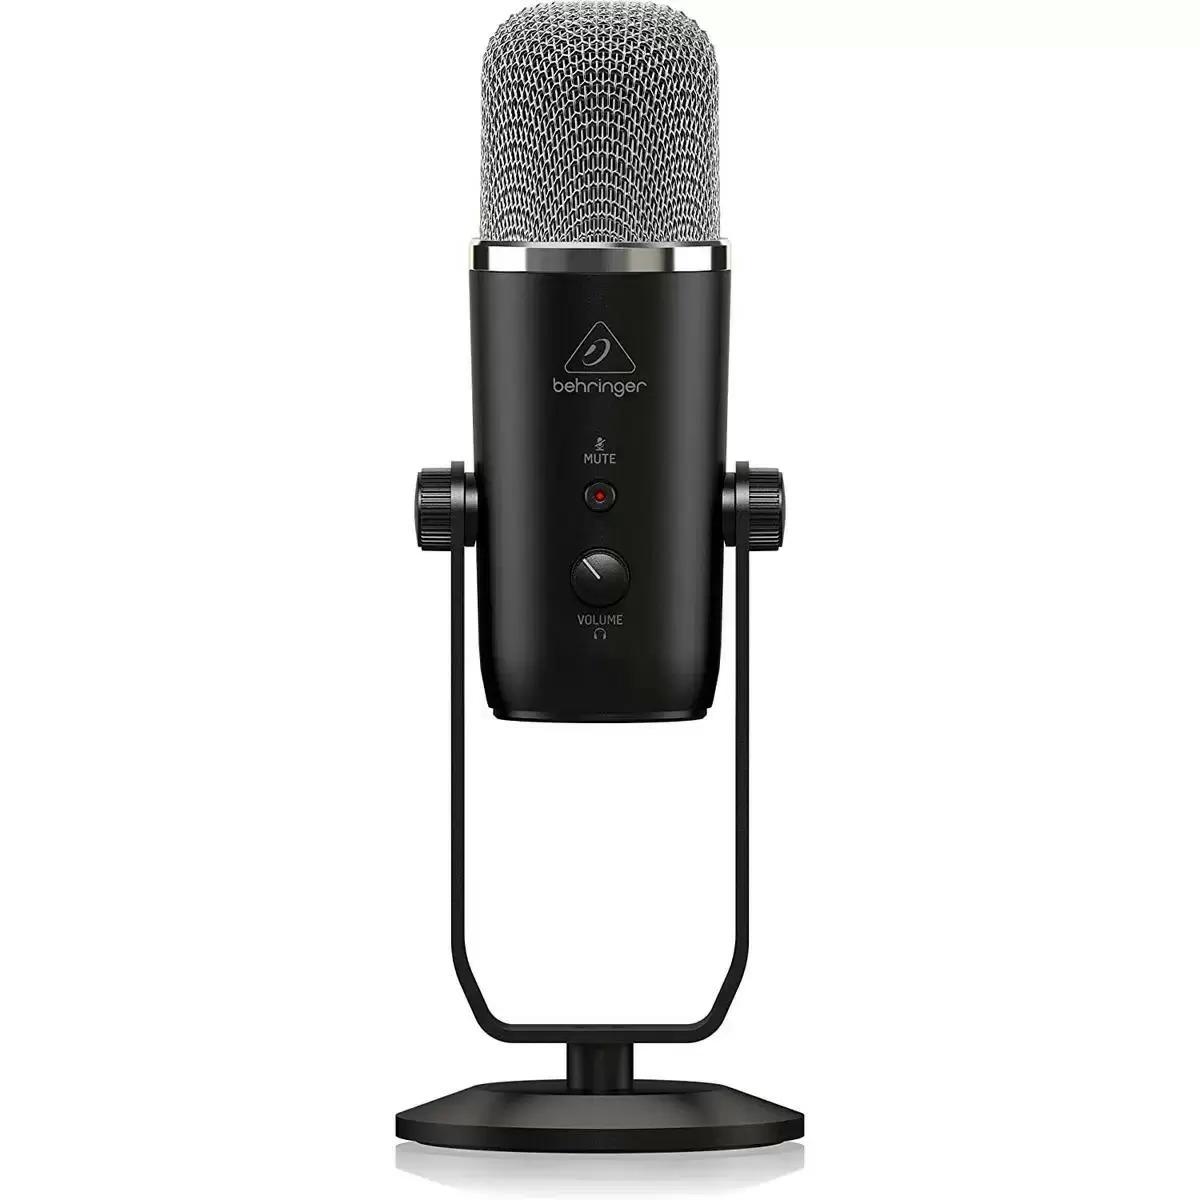 Behringer BIGFOOT All-In-One USB Studio Condenser Microphone for $29.13